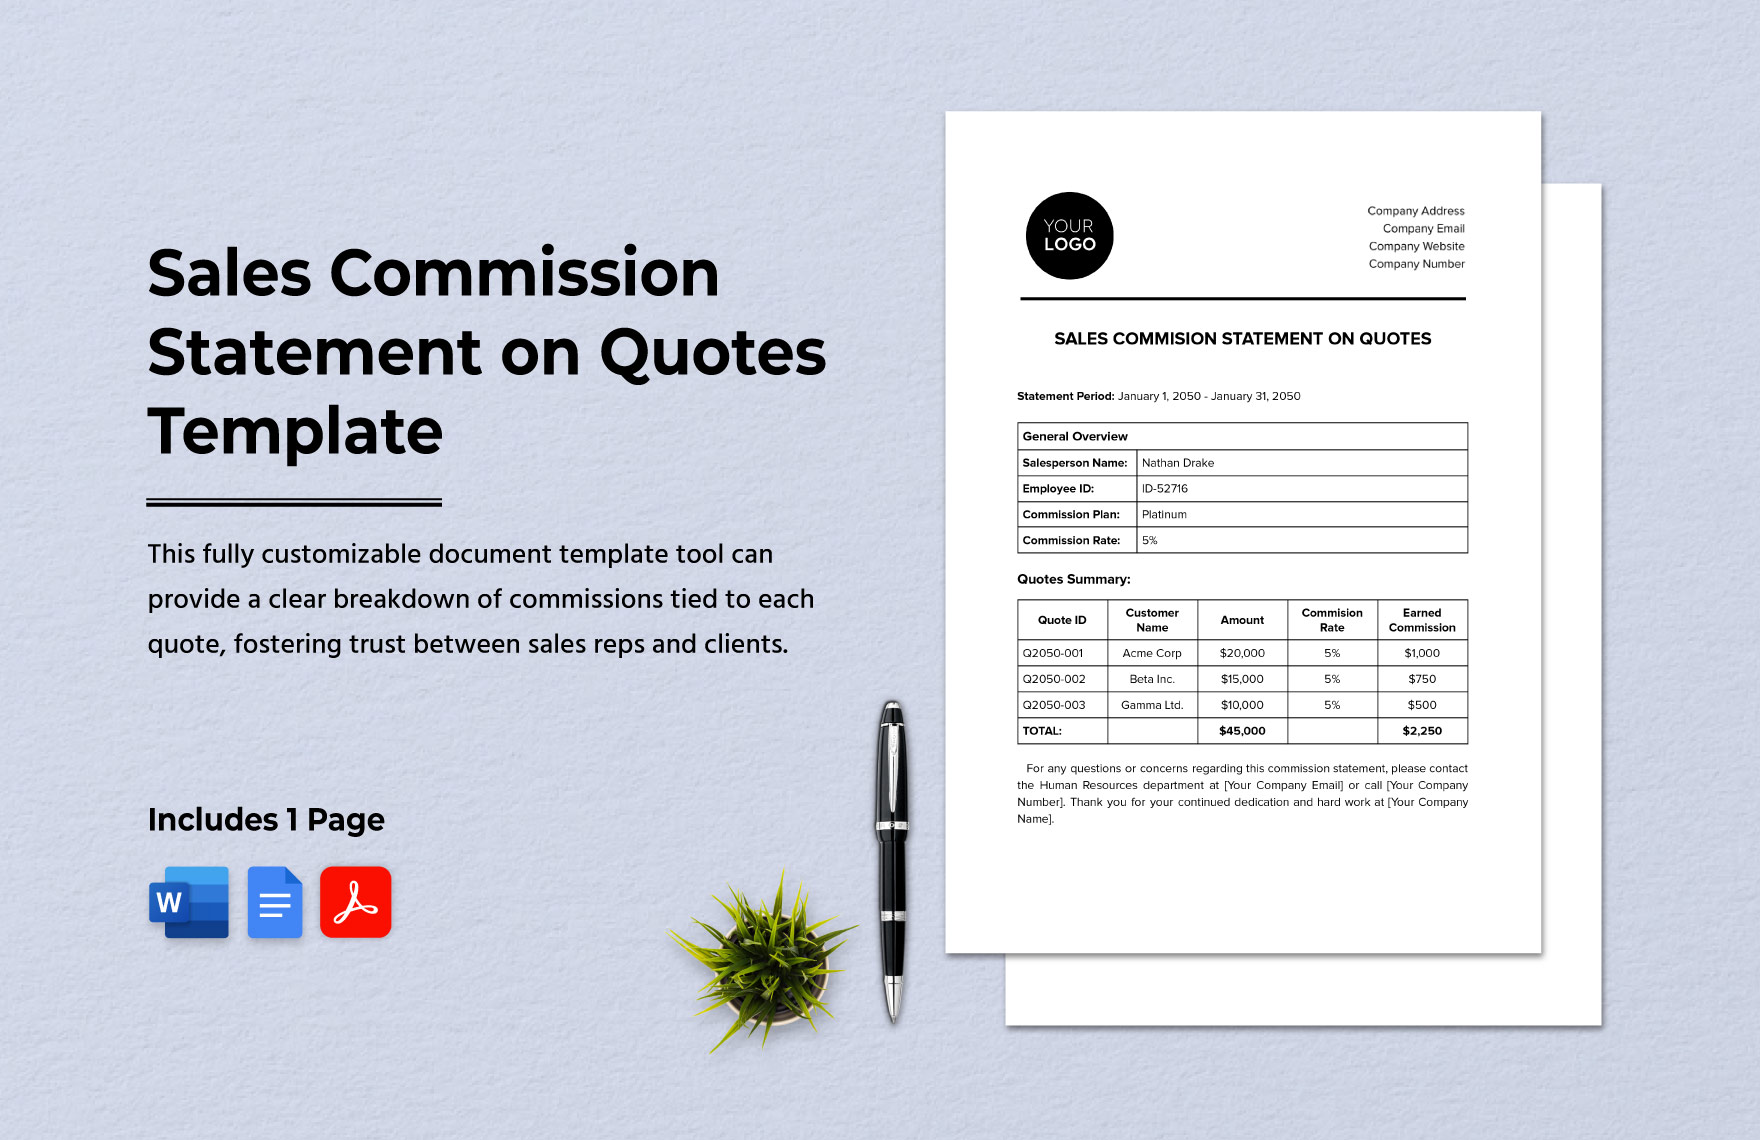 Sales Commission Statement on Quotes Template